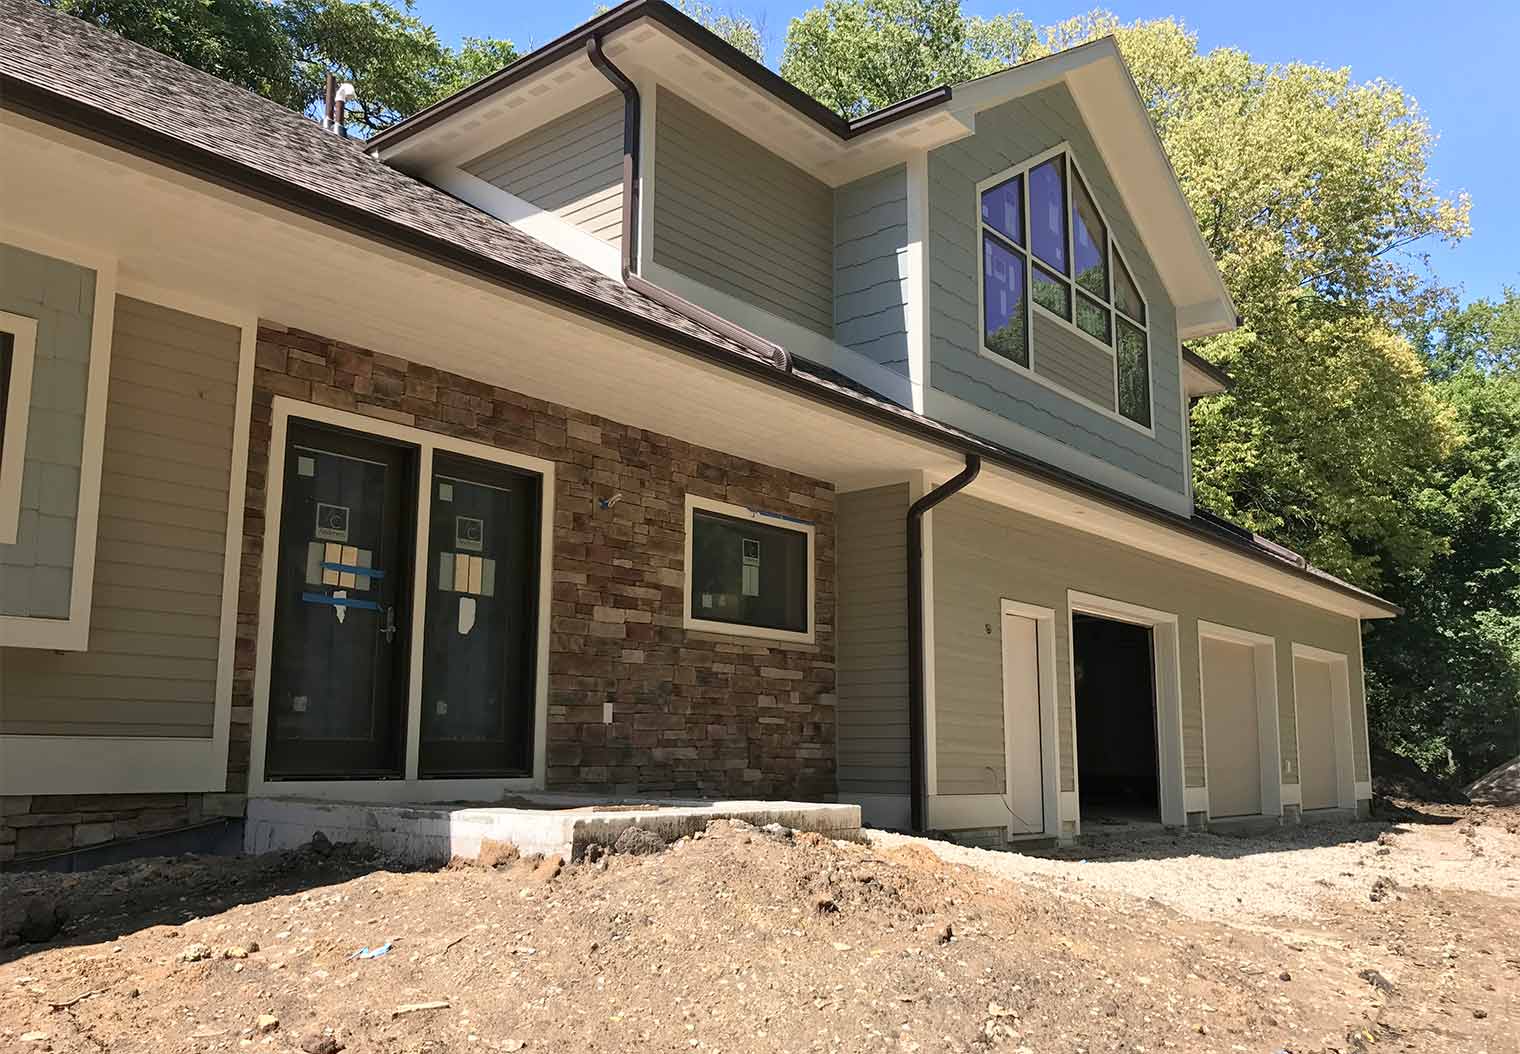 Home exterior finishing on Des Moines custom new home by builder Silent Rivers